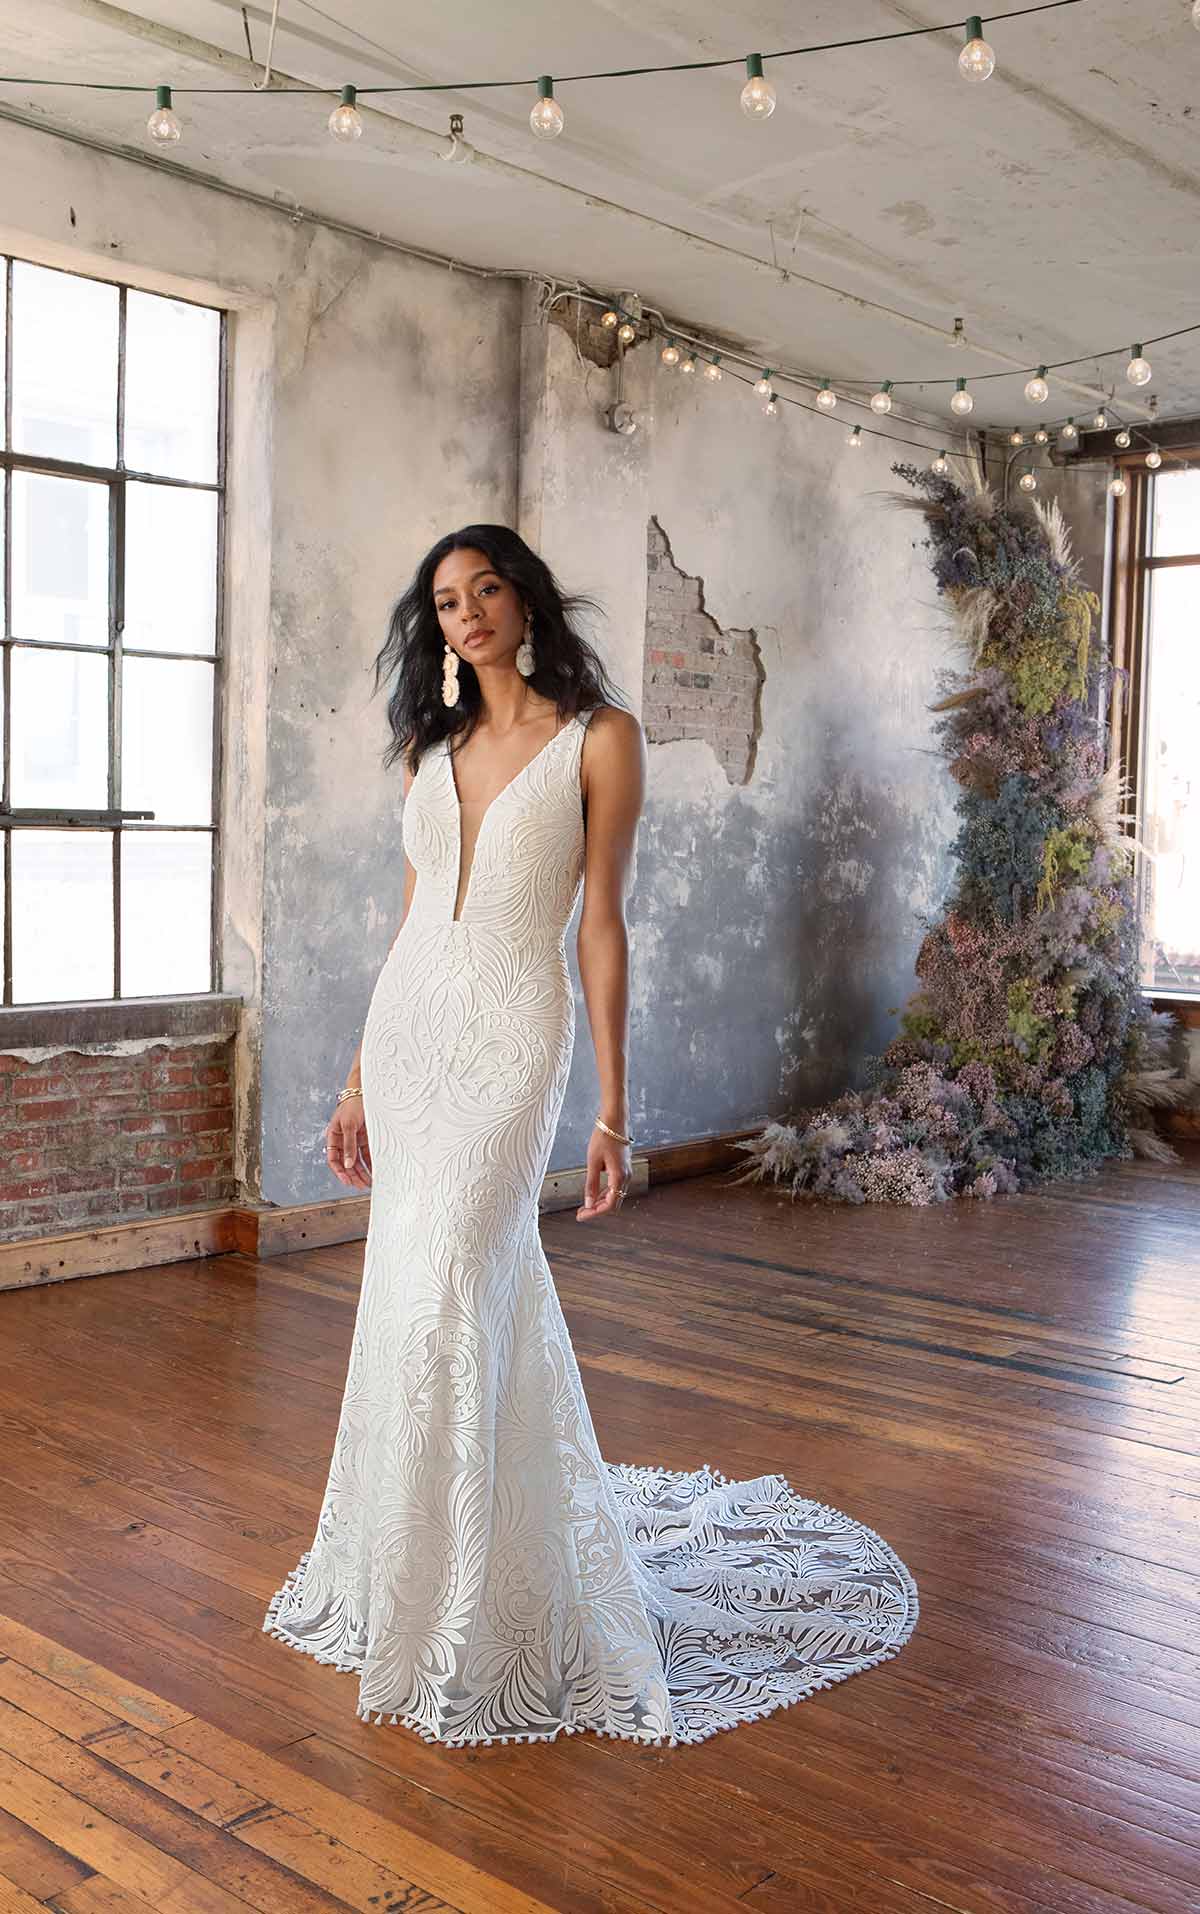 Wedding Dress with a Plunging Neckline — a Daring Gown for Free